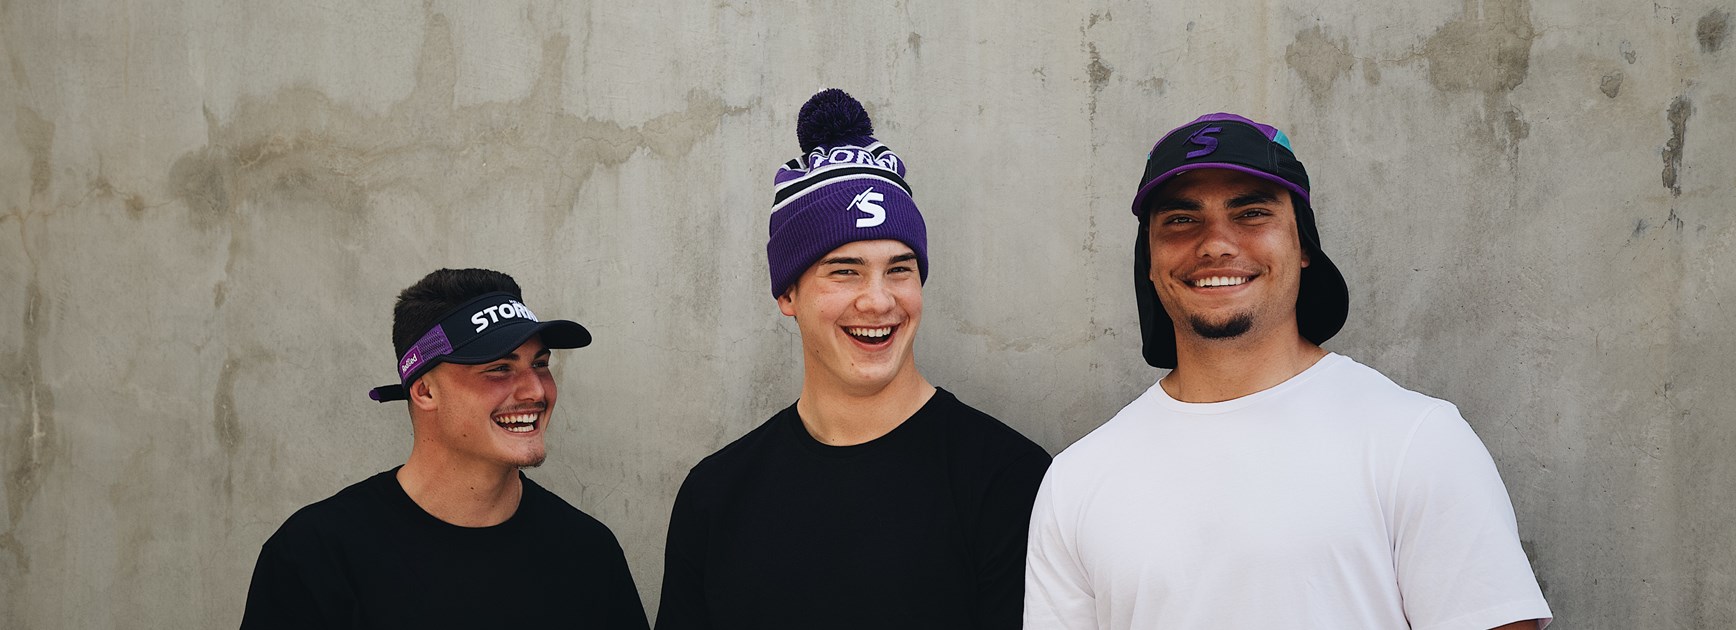 Storm teams up with New Era